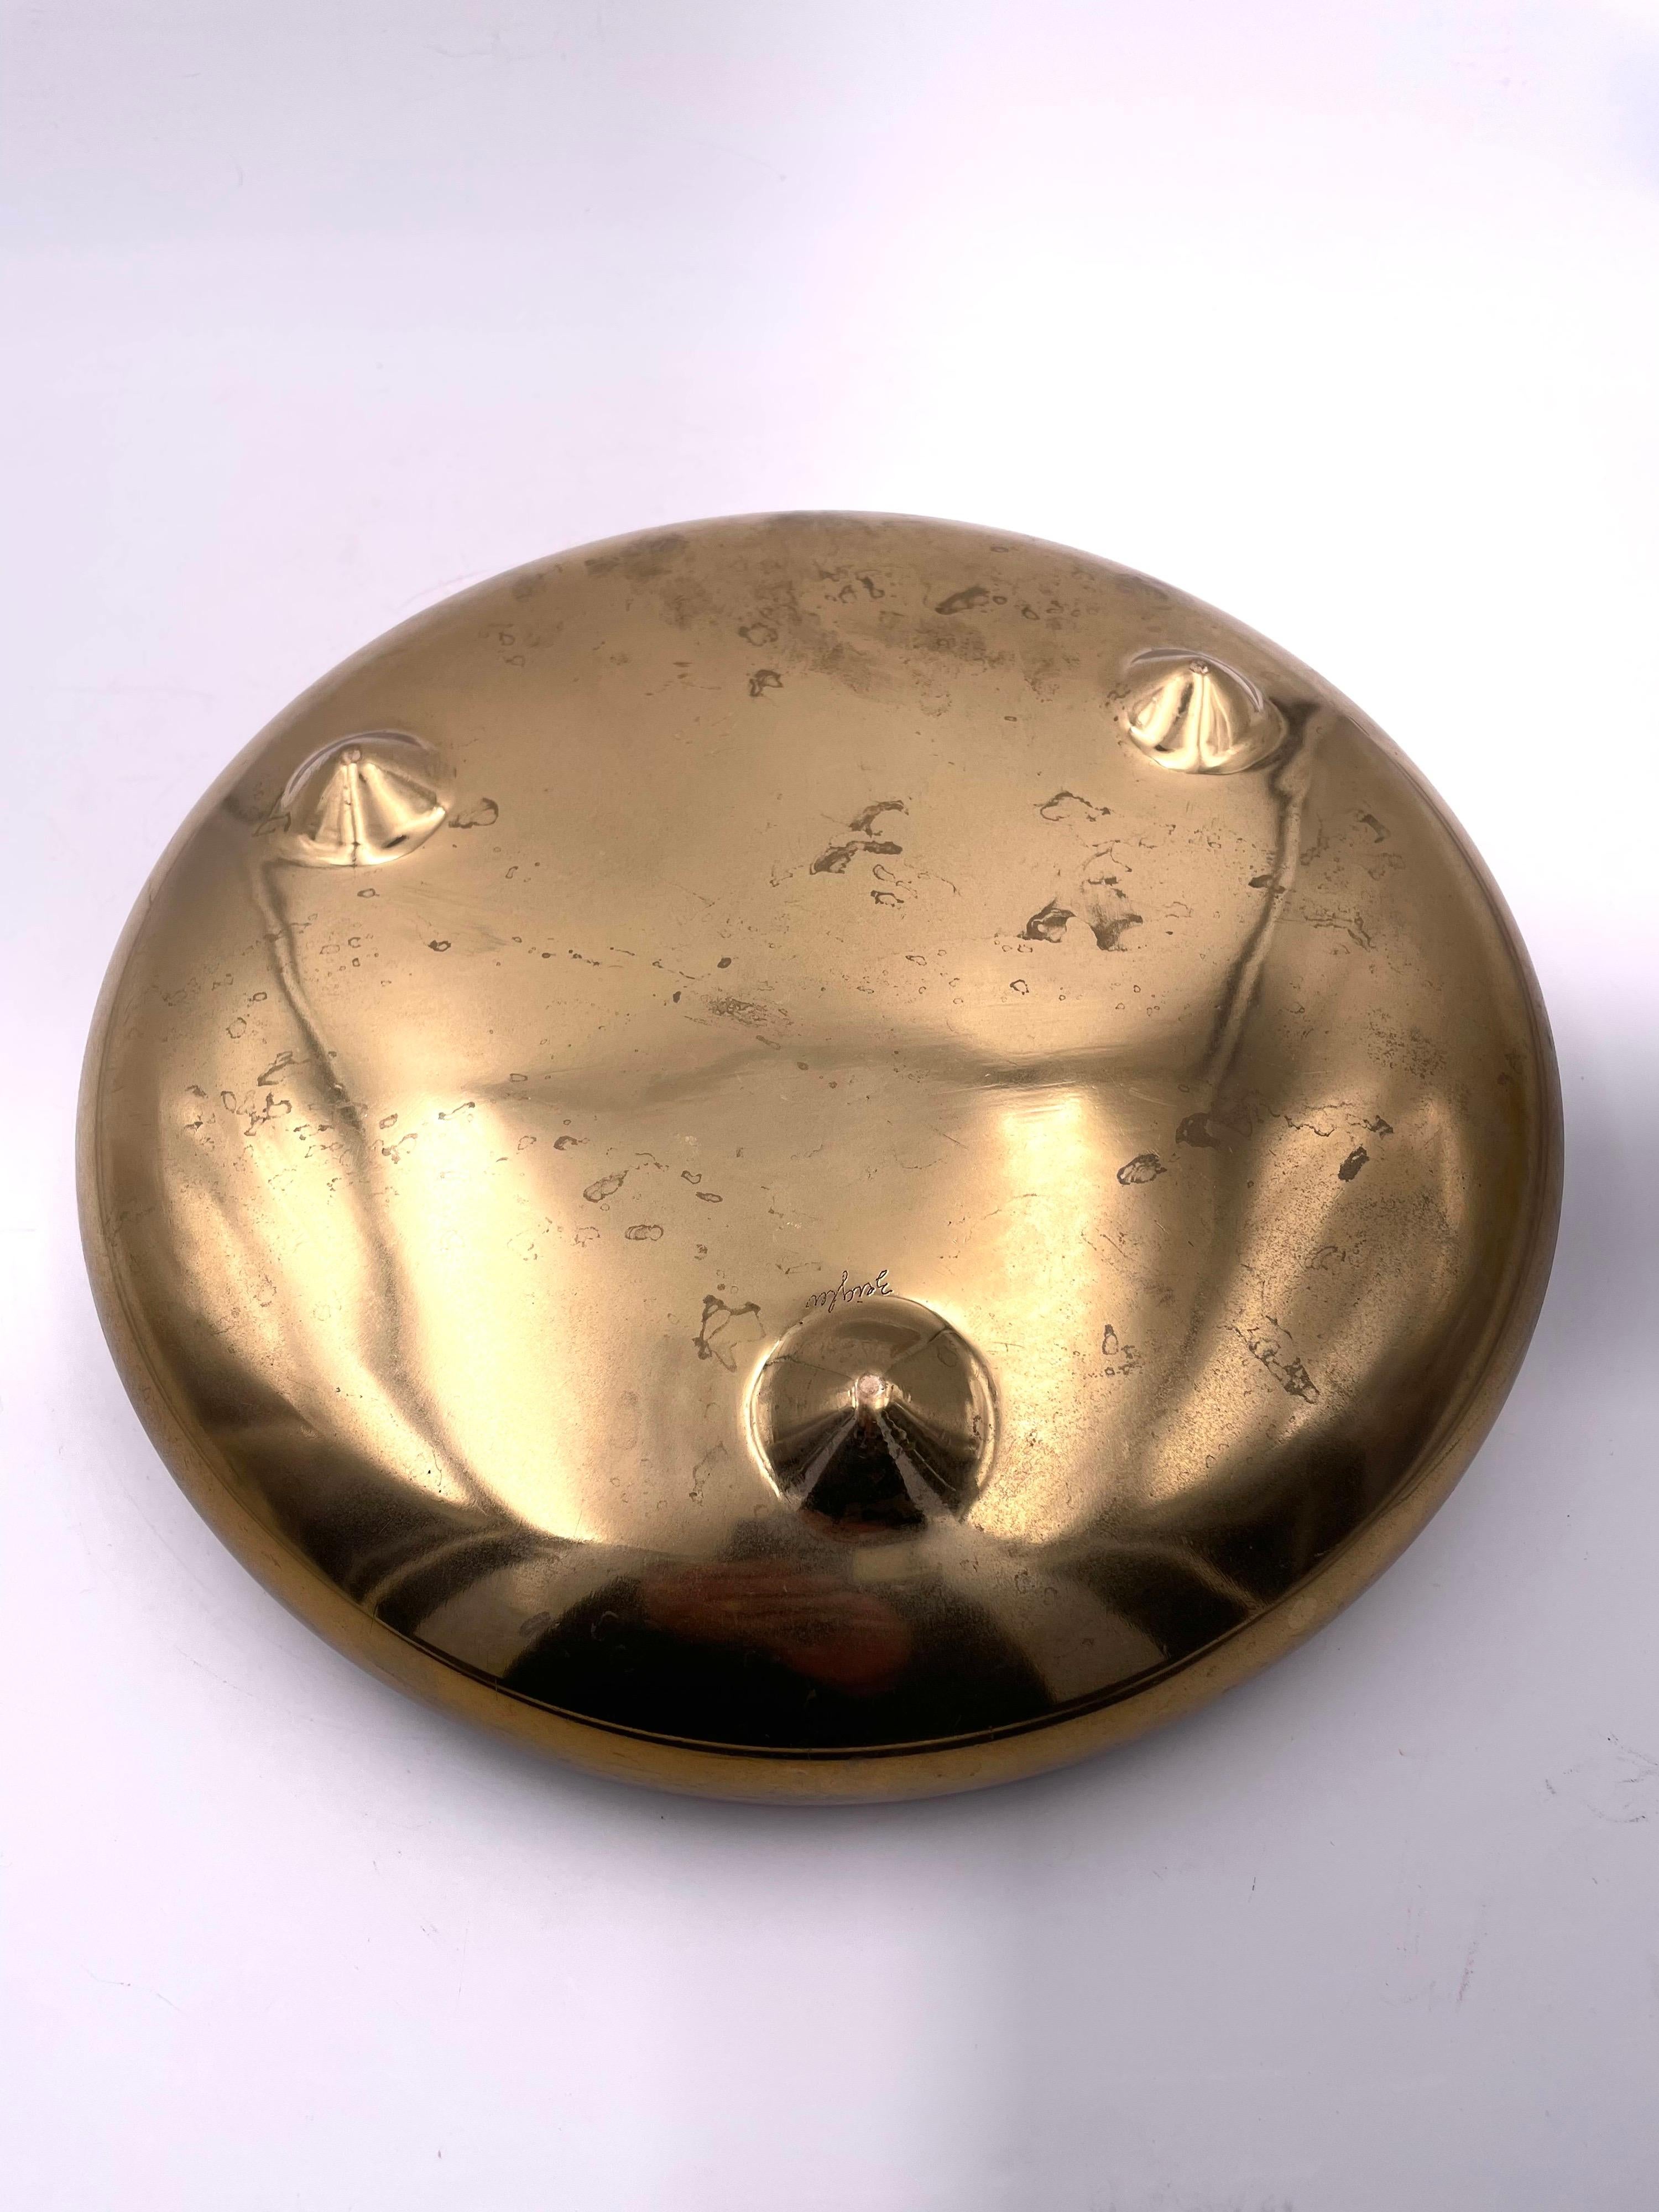 North American Mid-Century Modern Solid Polished Brass Bowl Catch it All